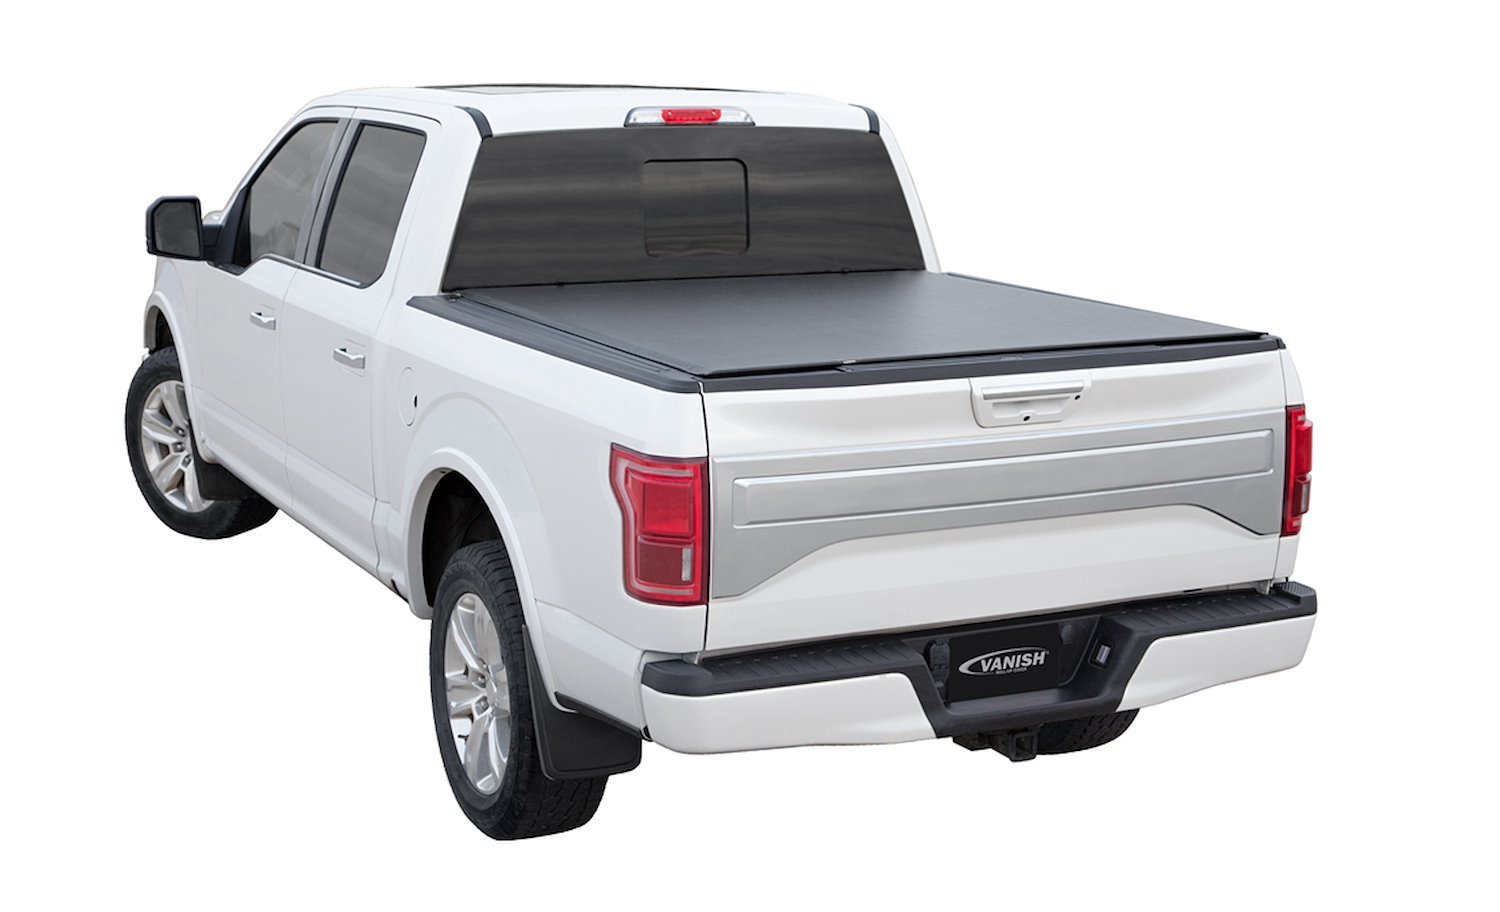 VANISH Roll-Up Tonneau Cover, Fits Select Ford F-150, with 5 ft. 6 in. Bed